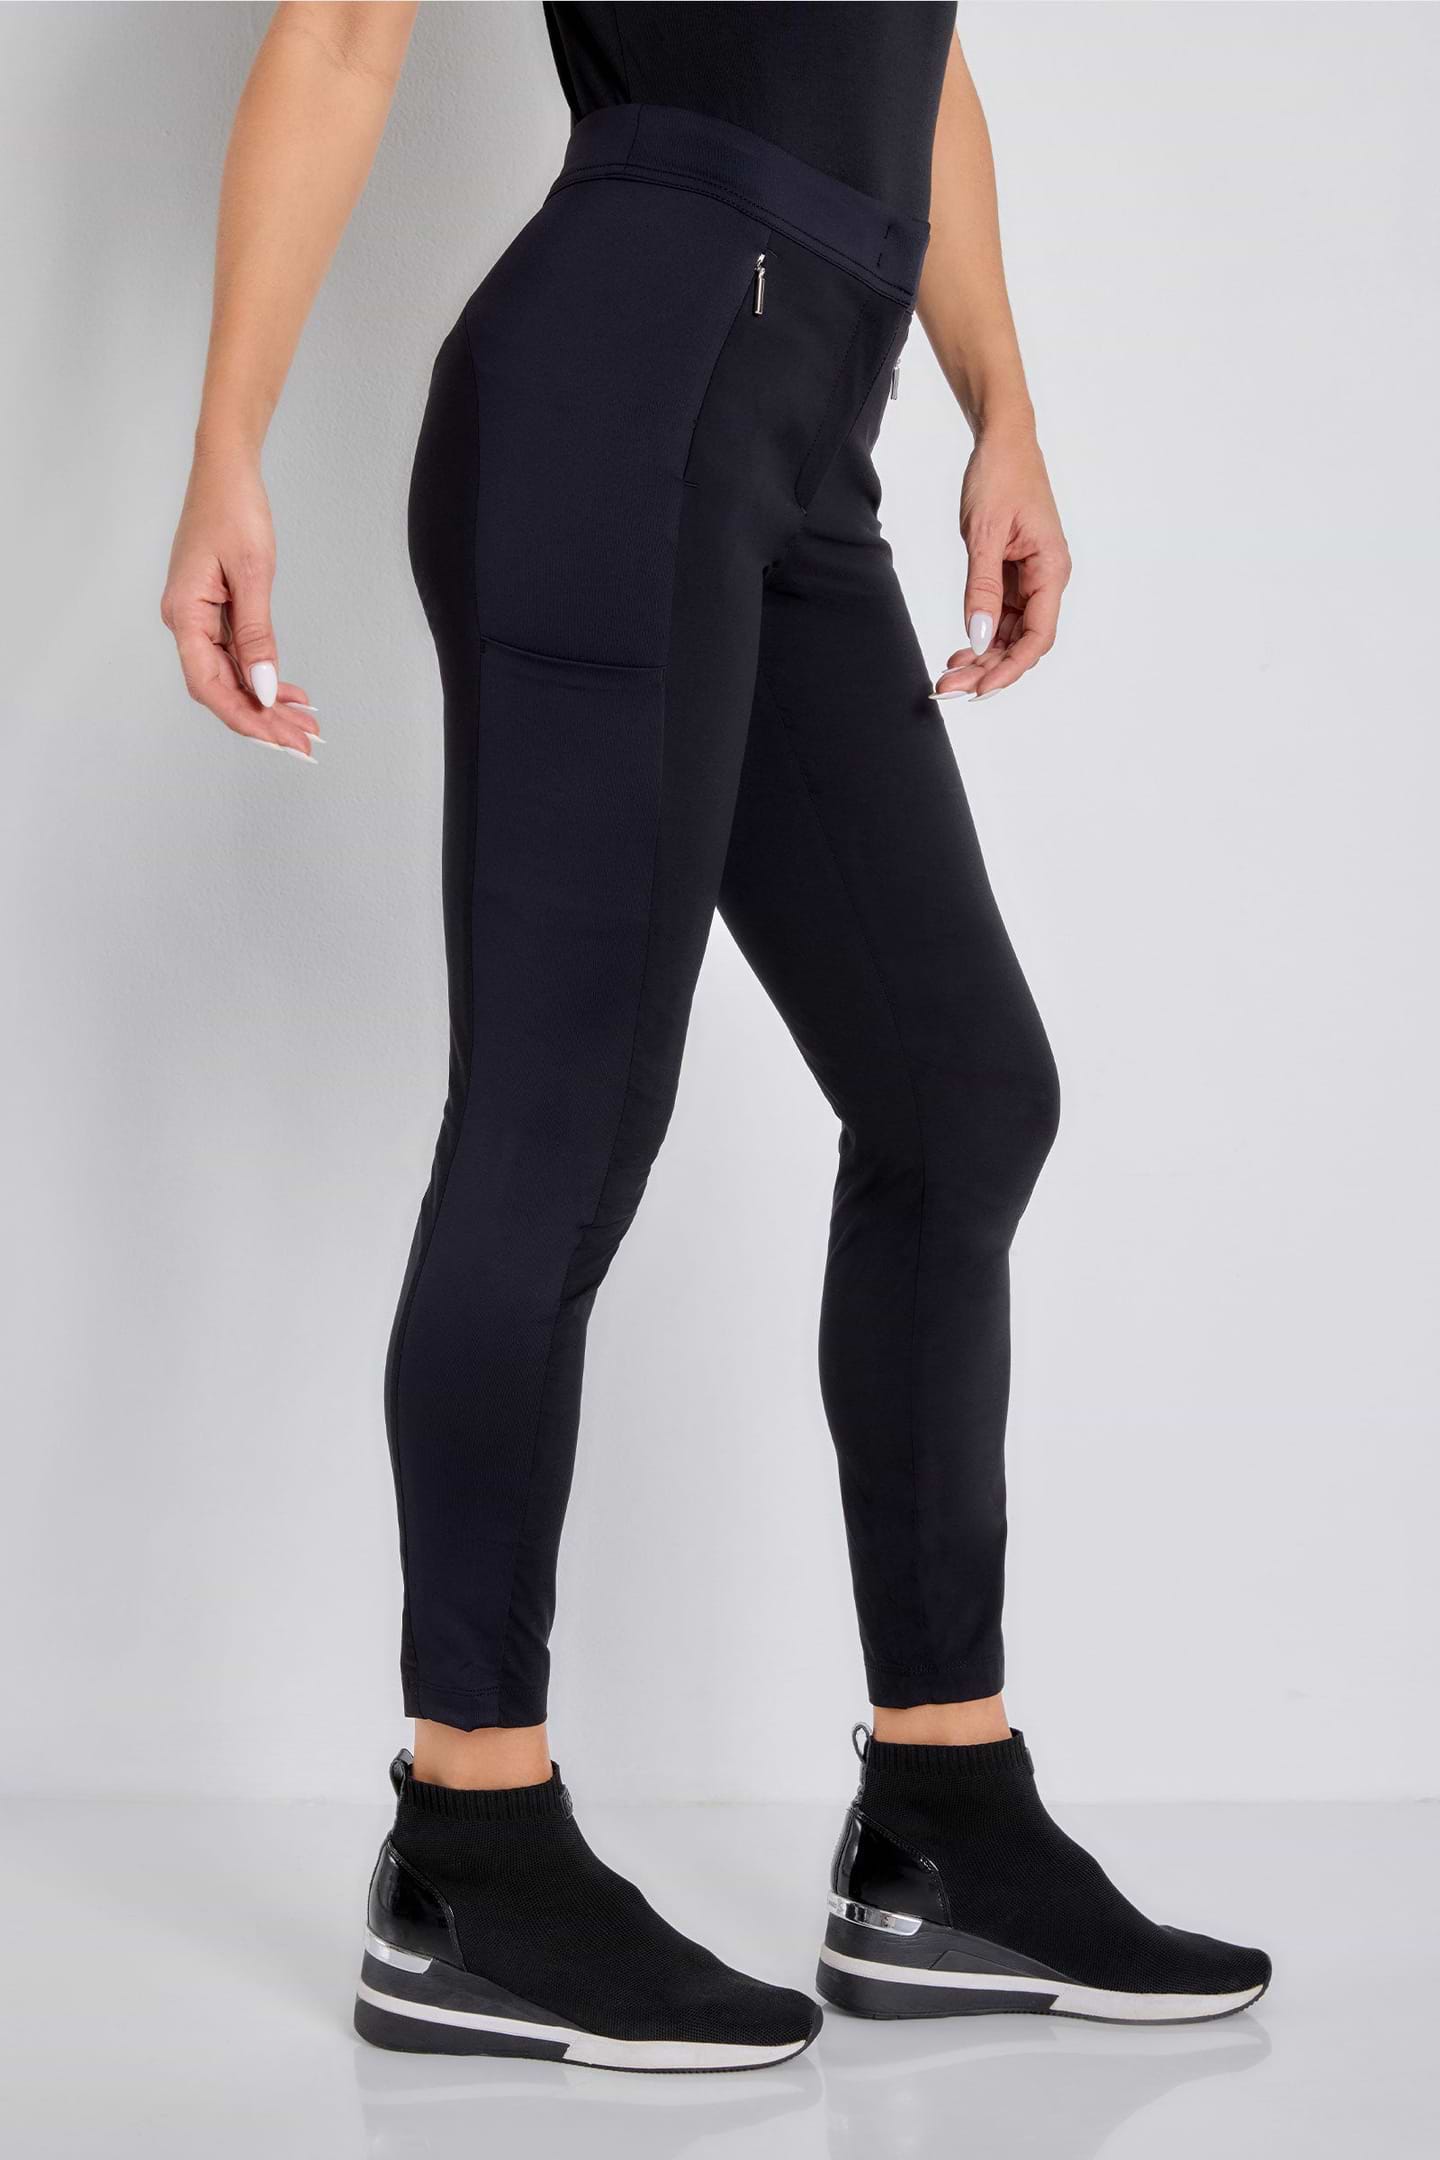 The Best Travel Pants. Side Profile of the Ipant Hybrid Zip Front Slim Fit Pant in Black